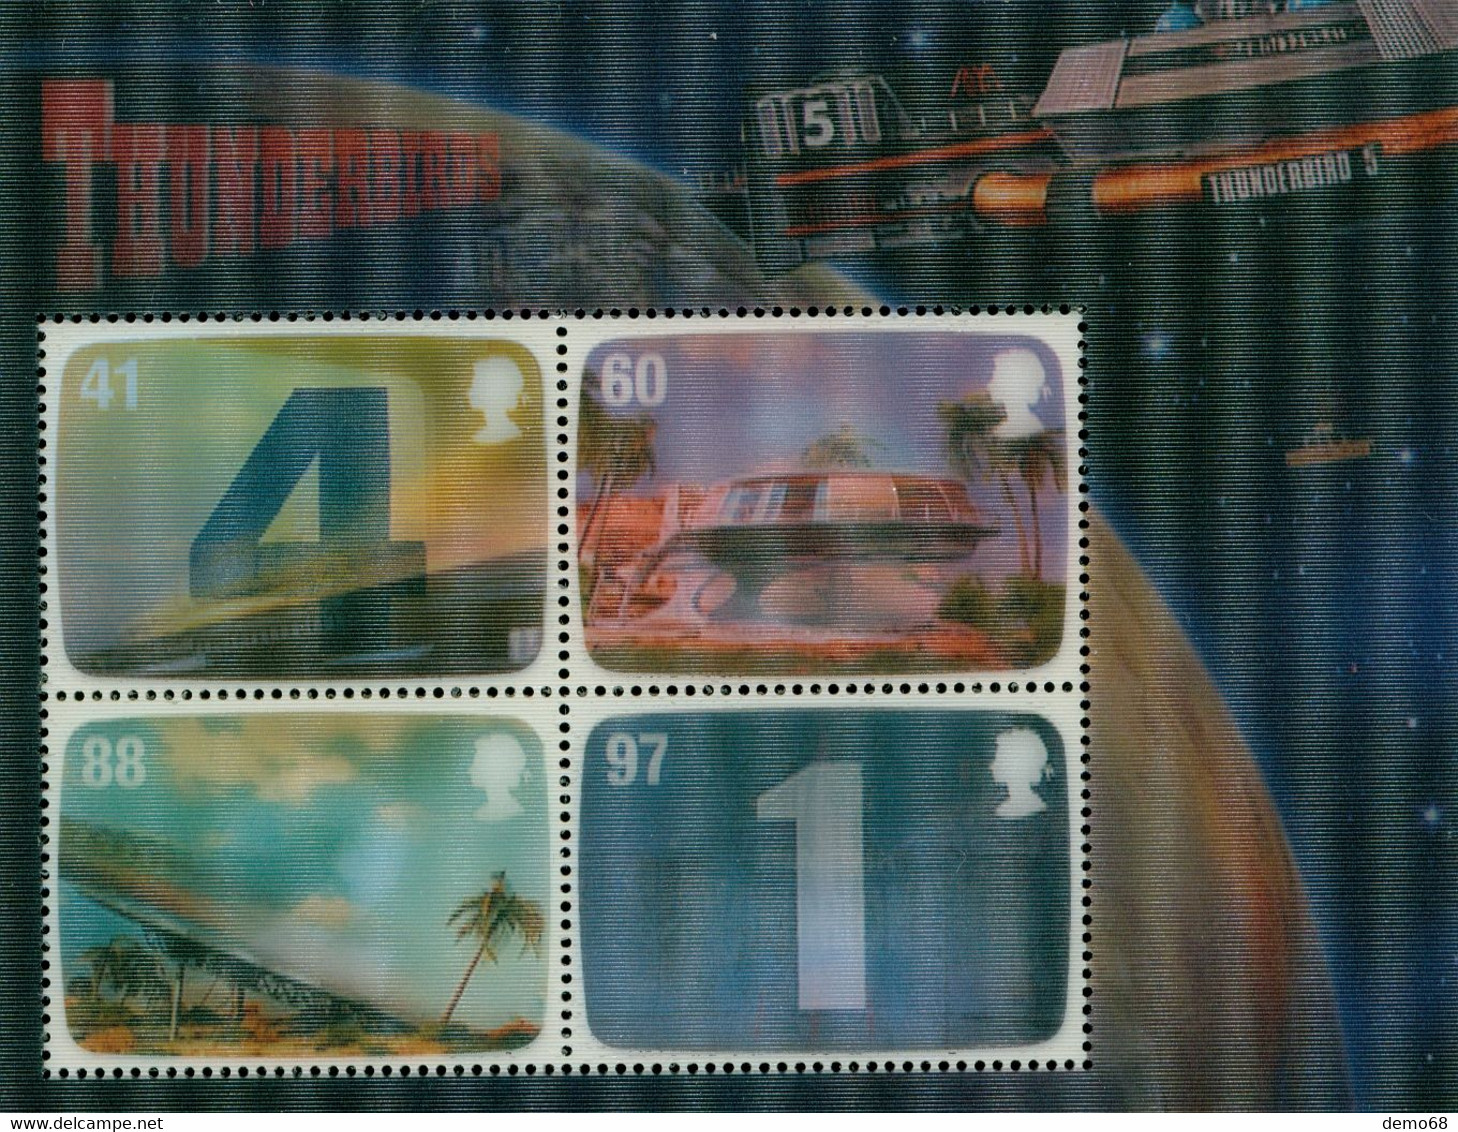 Stamp Timbre England Great Britain  Thunderbirds Gerry Anderson GB Feuillet Neuf 4 Et 6 Timbre S Royal Mail Mint Stamps - Verzamelingen